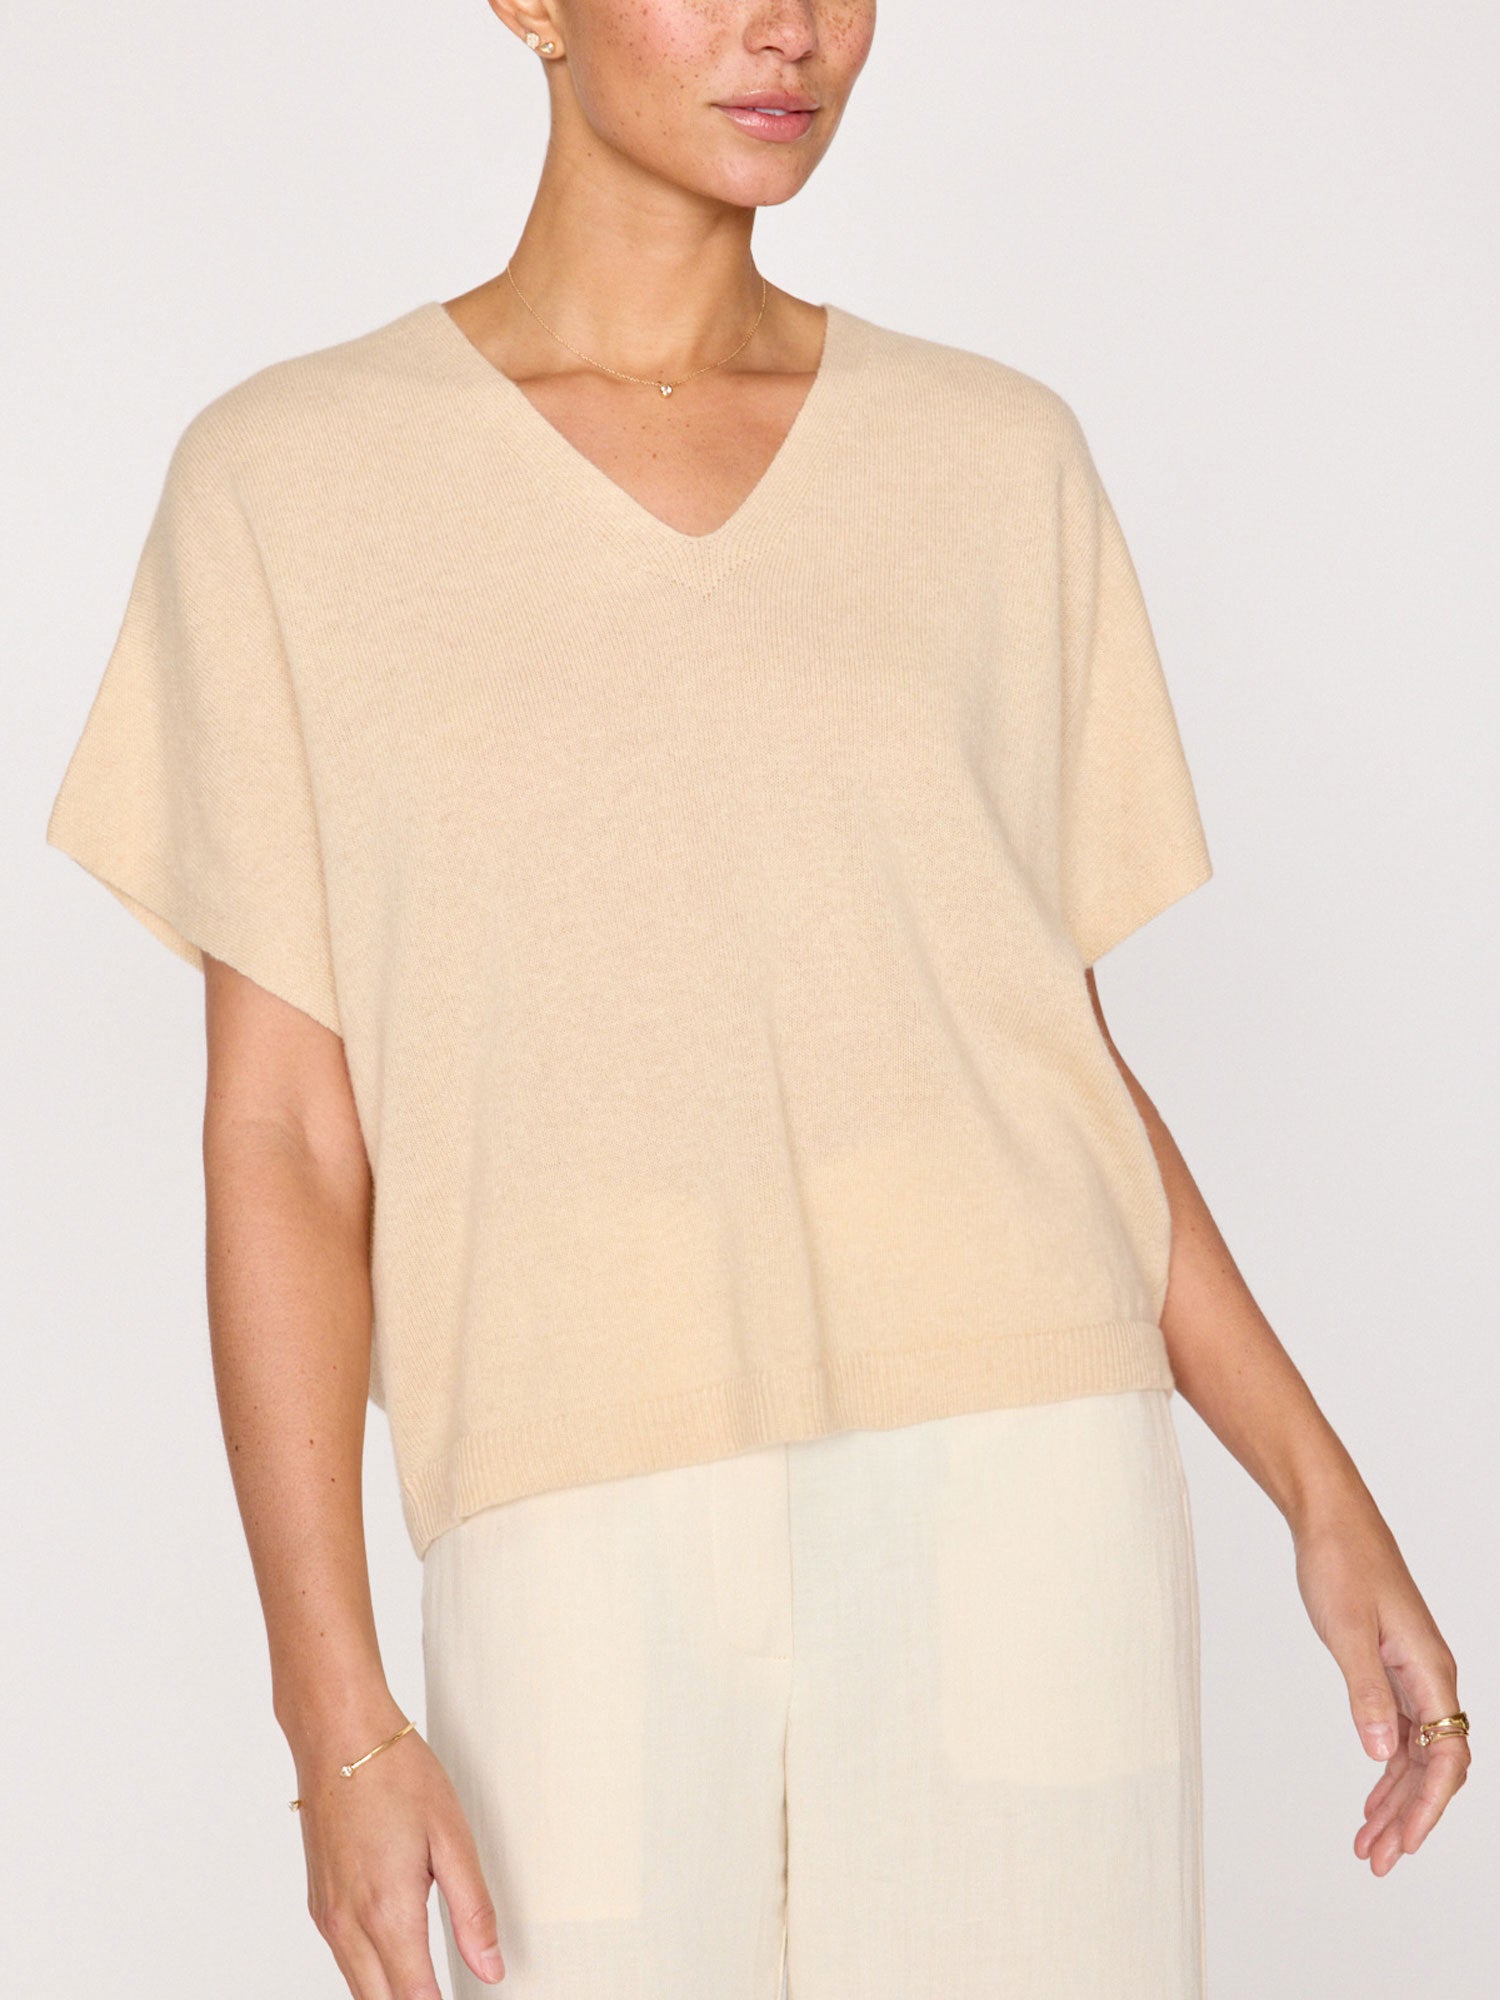 Ophi cashmere tan V-neck t-shirt top front view 3